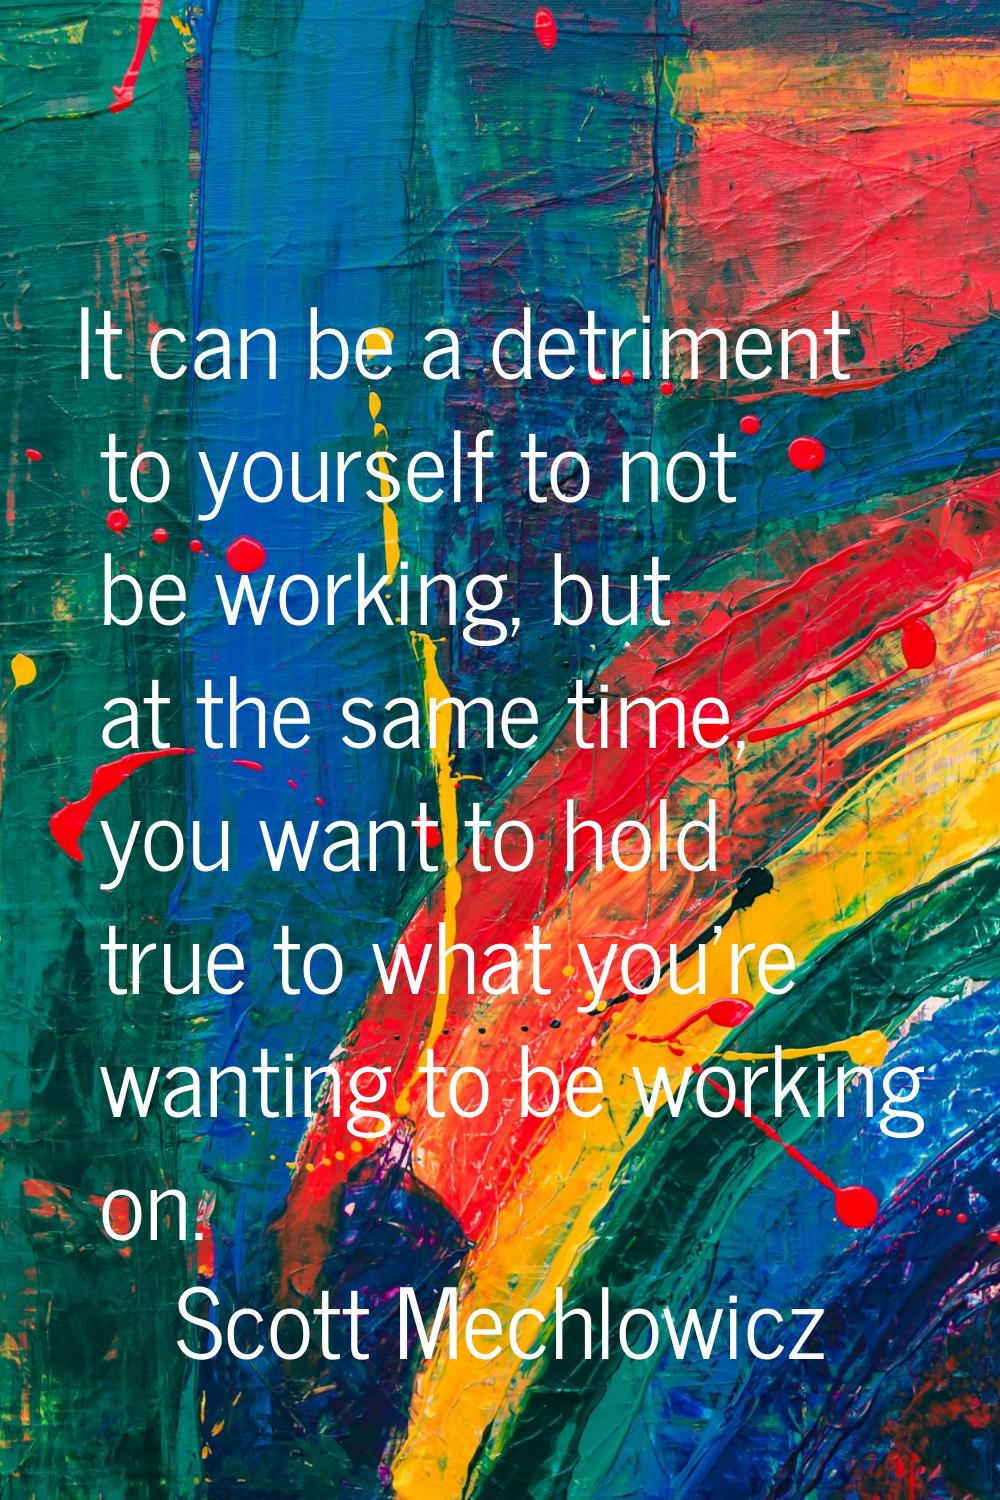 It can be a detriment to yourself to not be working, but at the same time, you want to hold true to